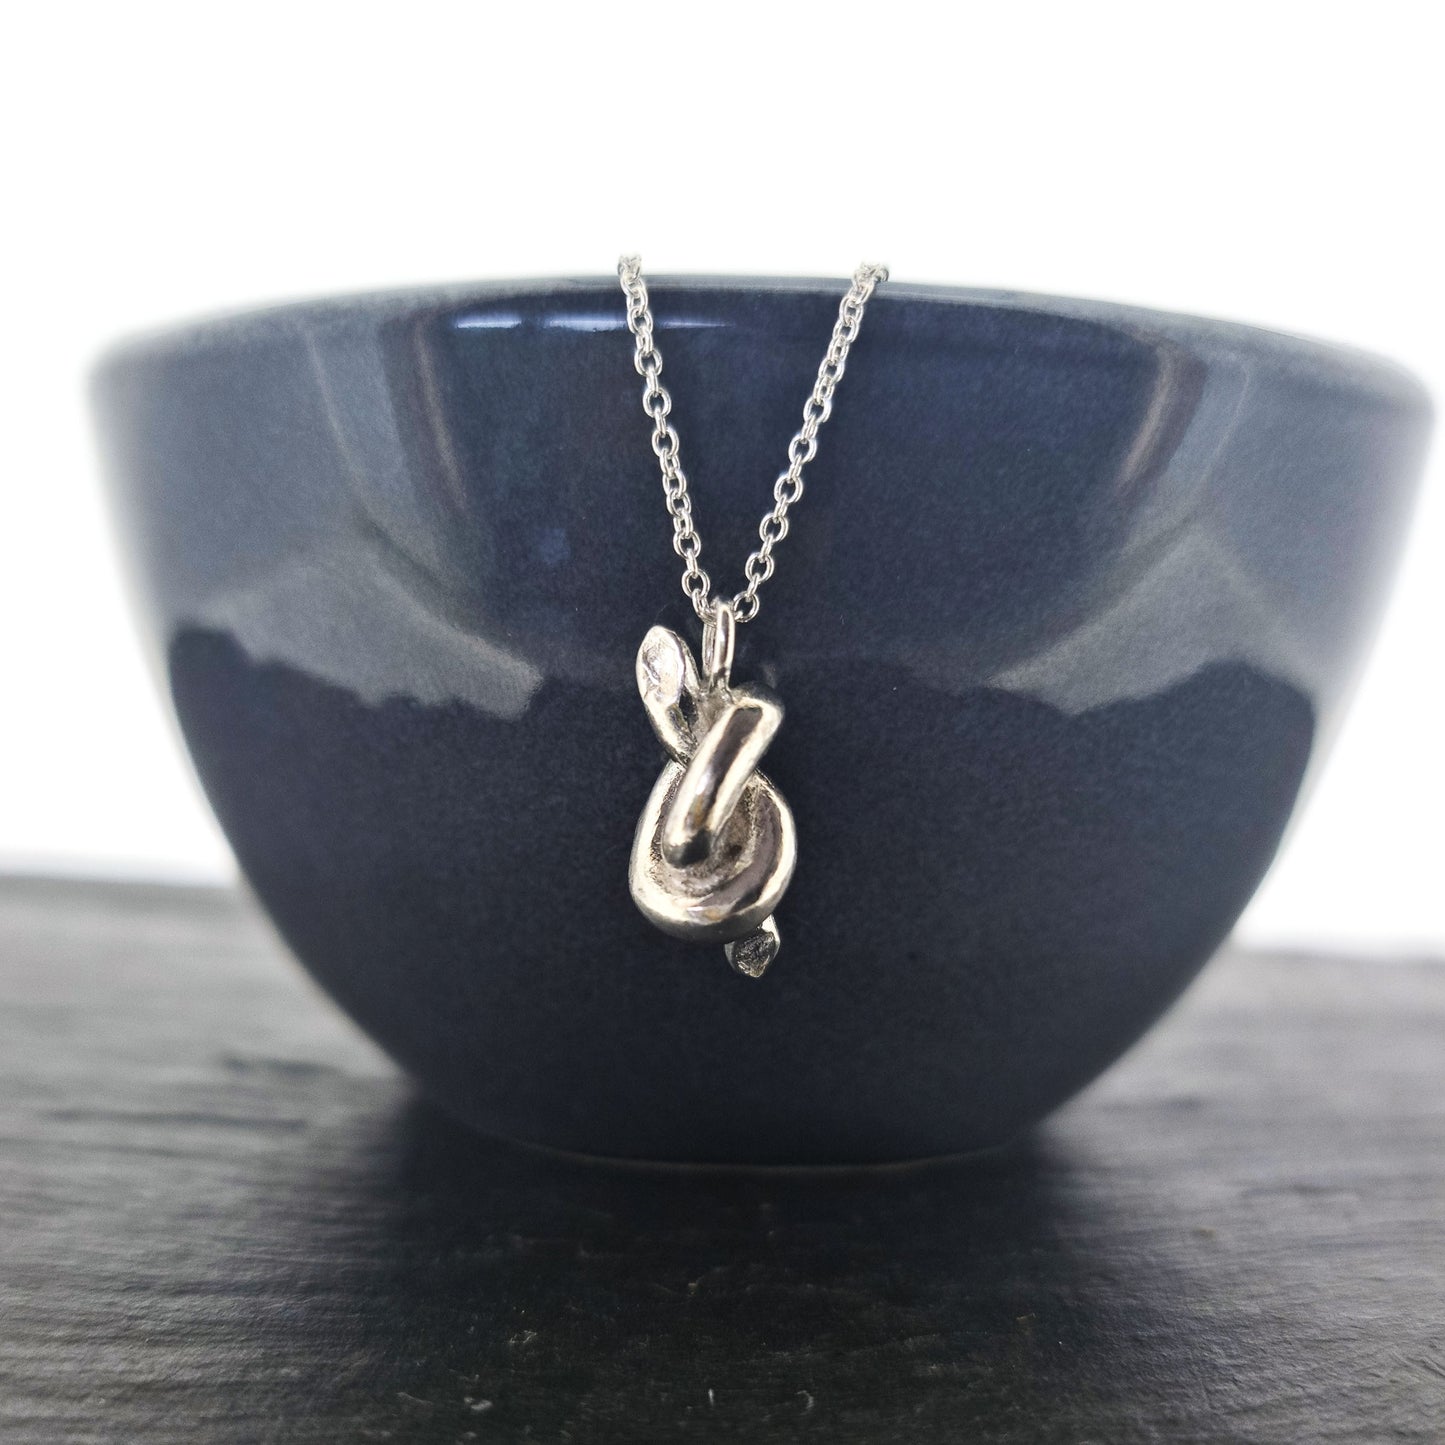 Silver chain with a silver knot pendant. Shown on a black bowl.